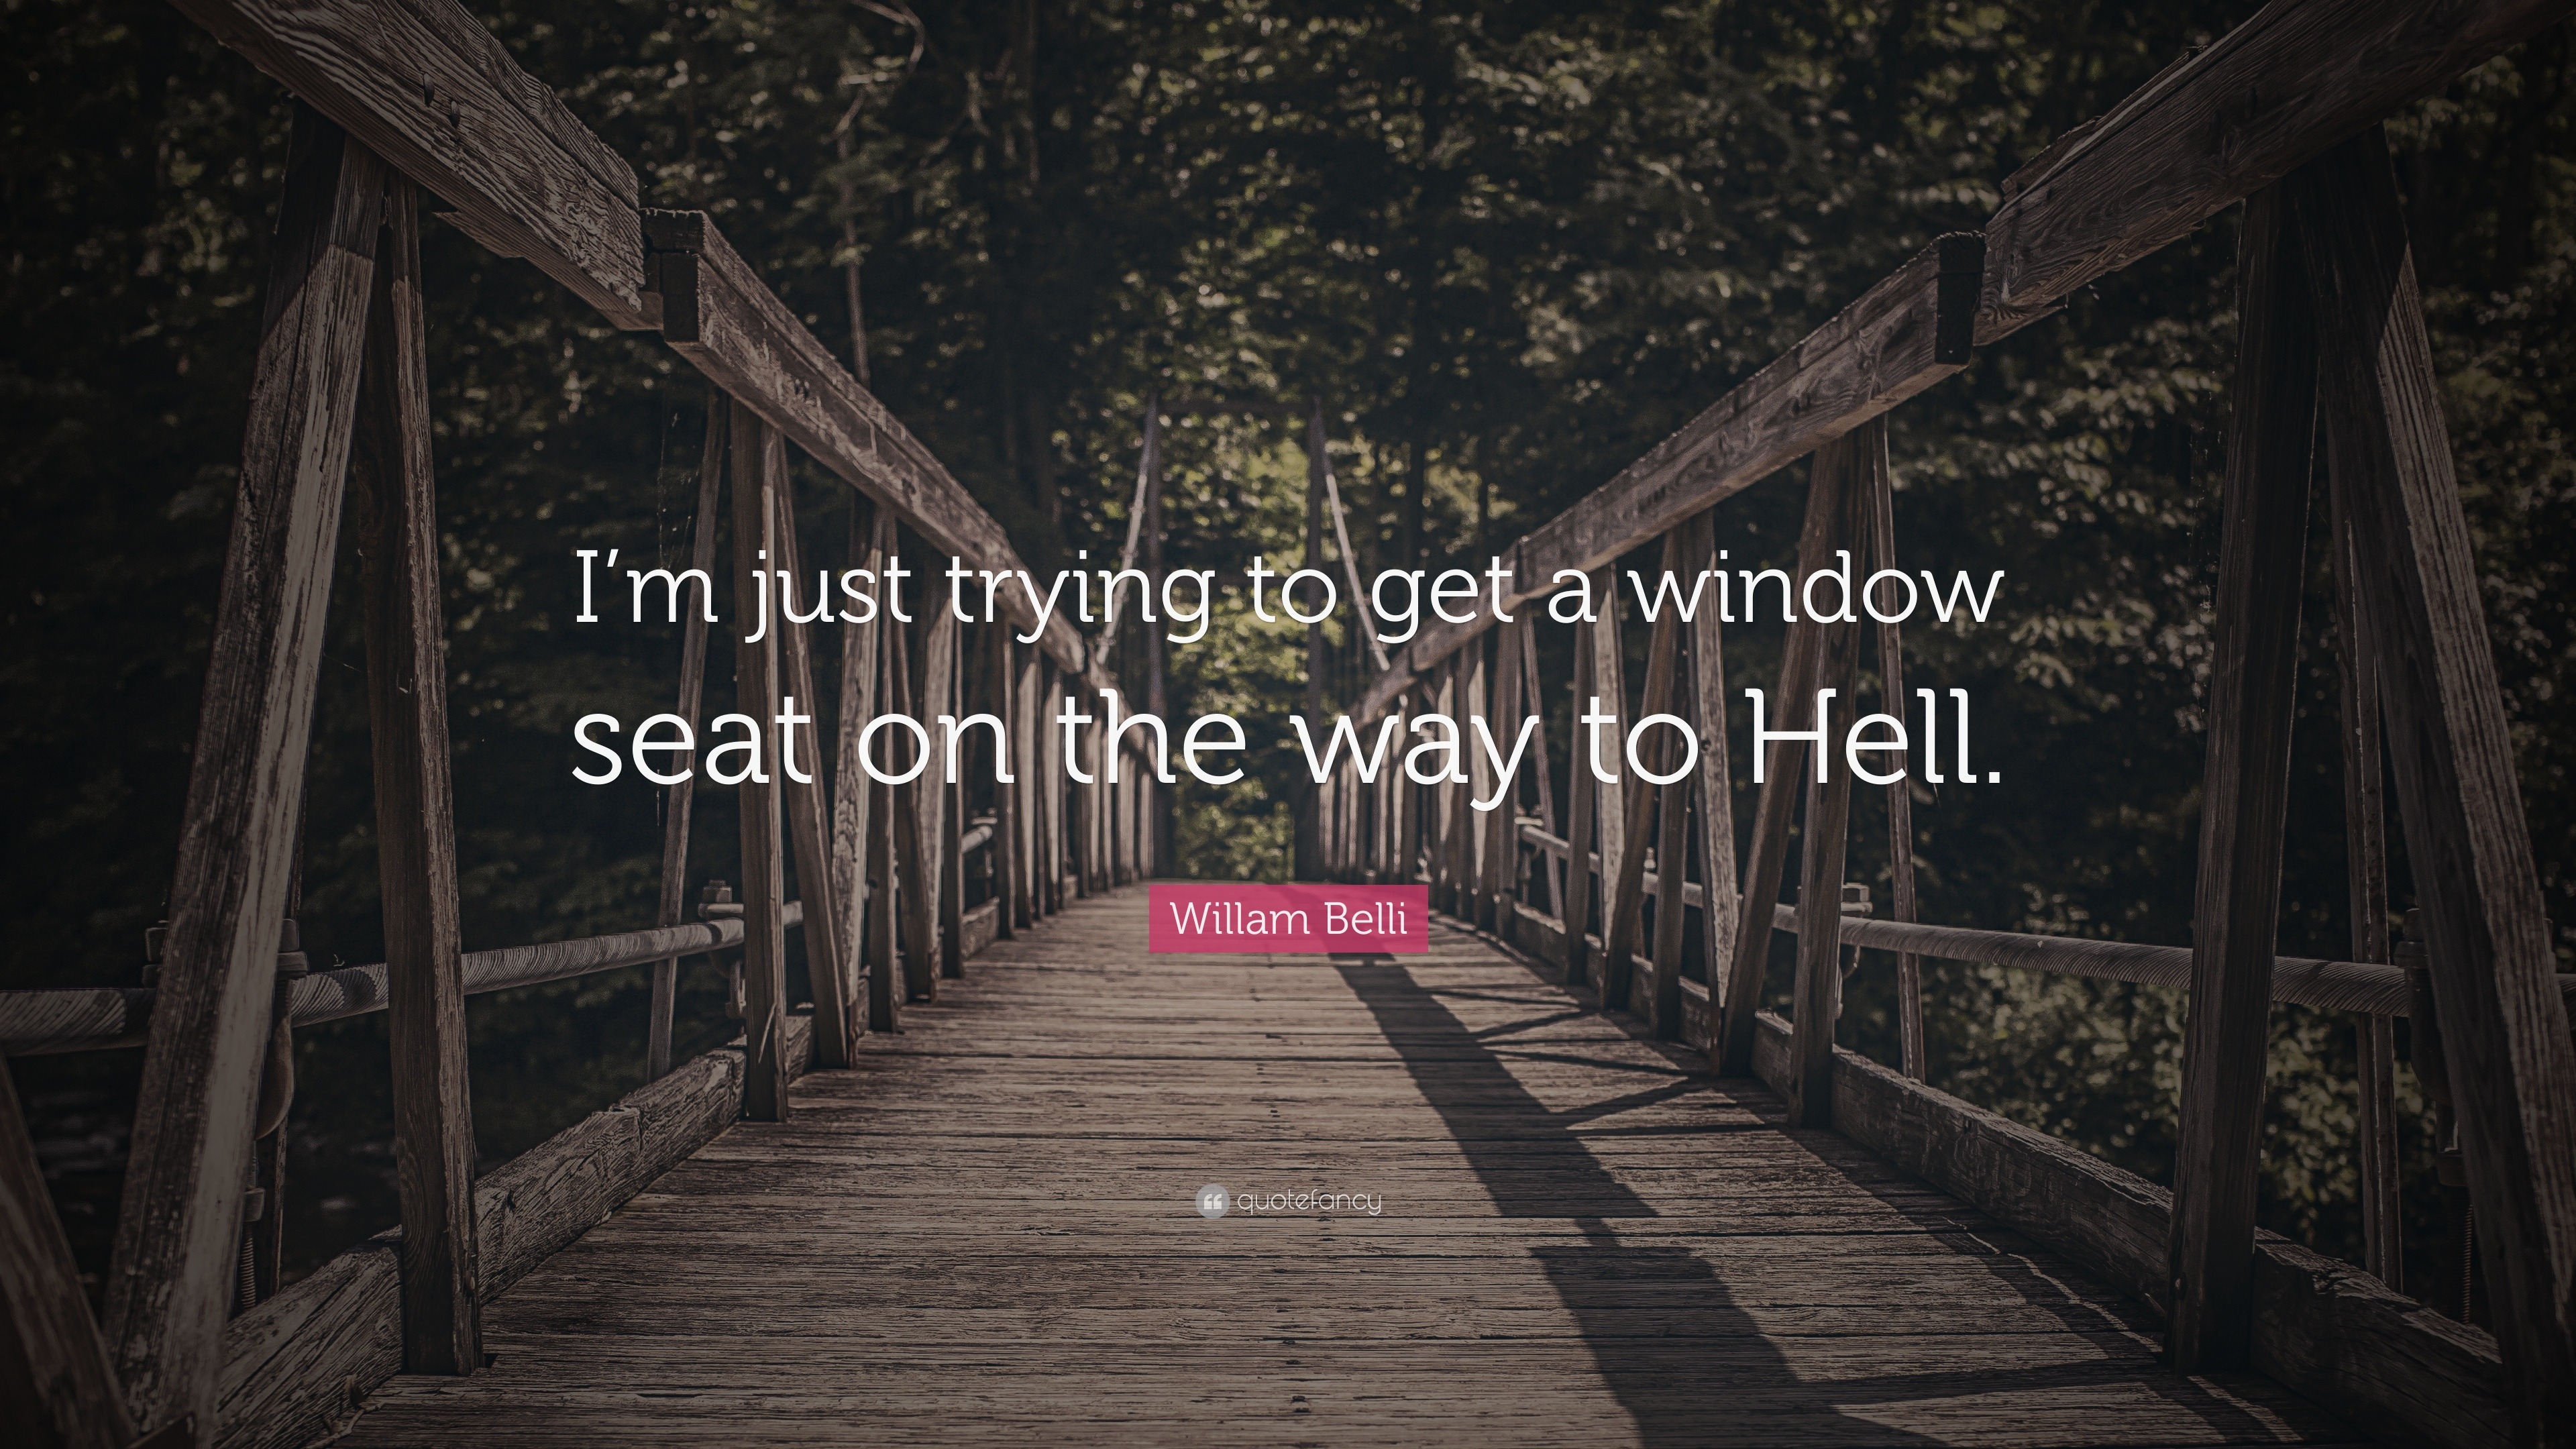 Willam Belli Quote: "I'm just trying to get a window seat on the way to Hell."